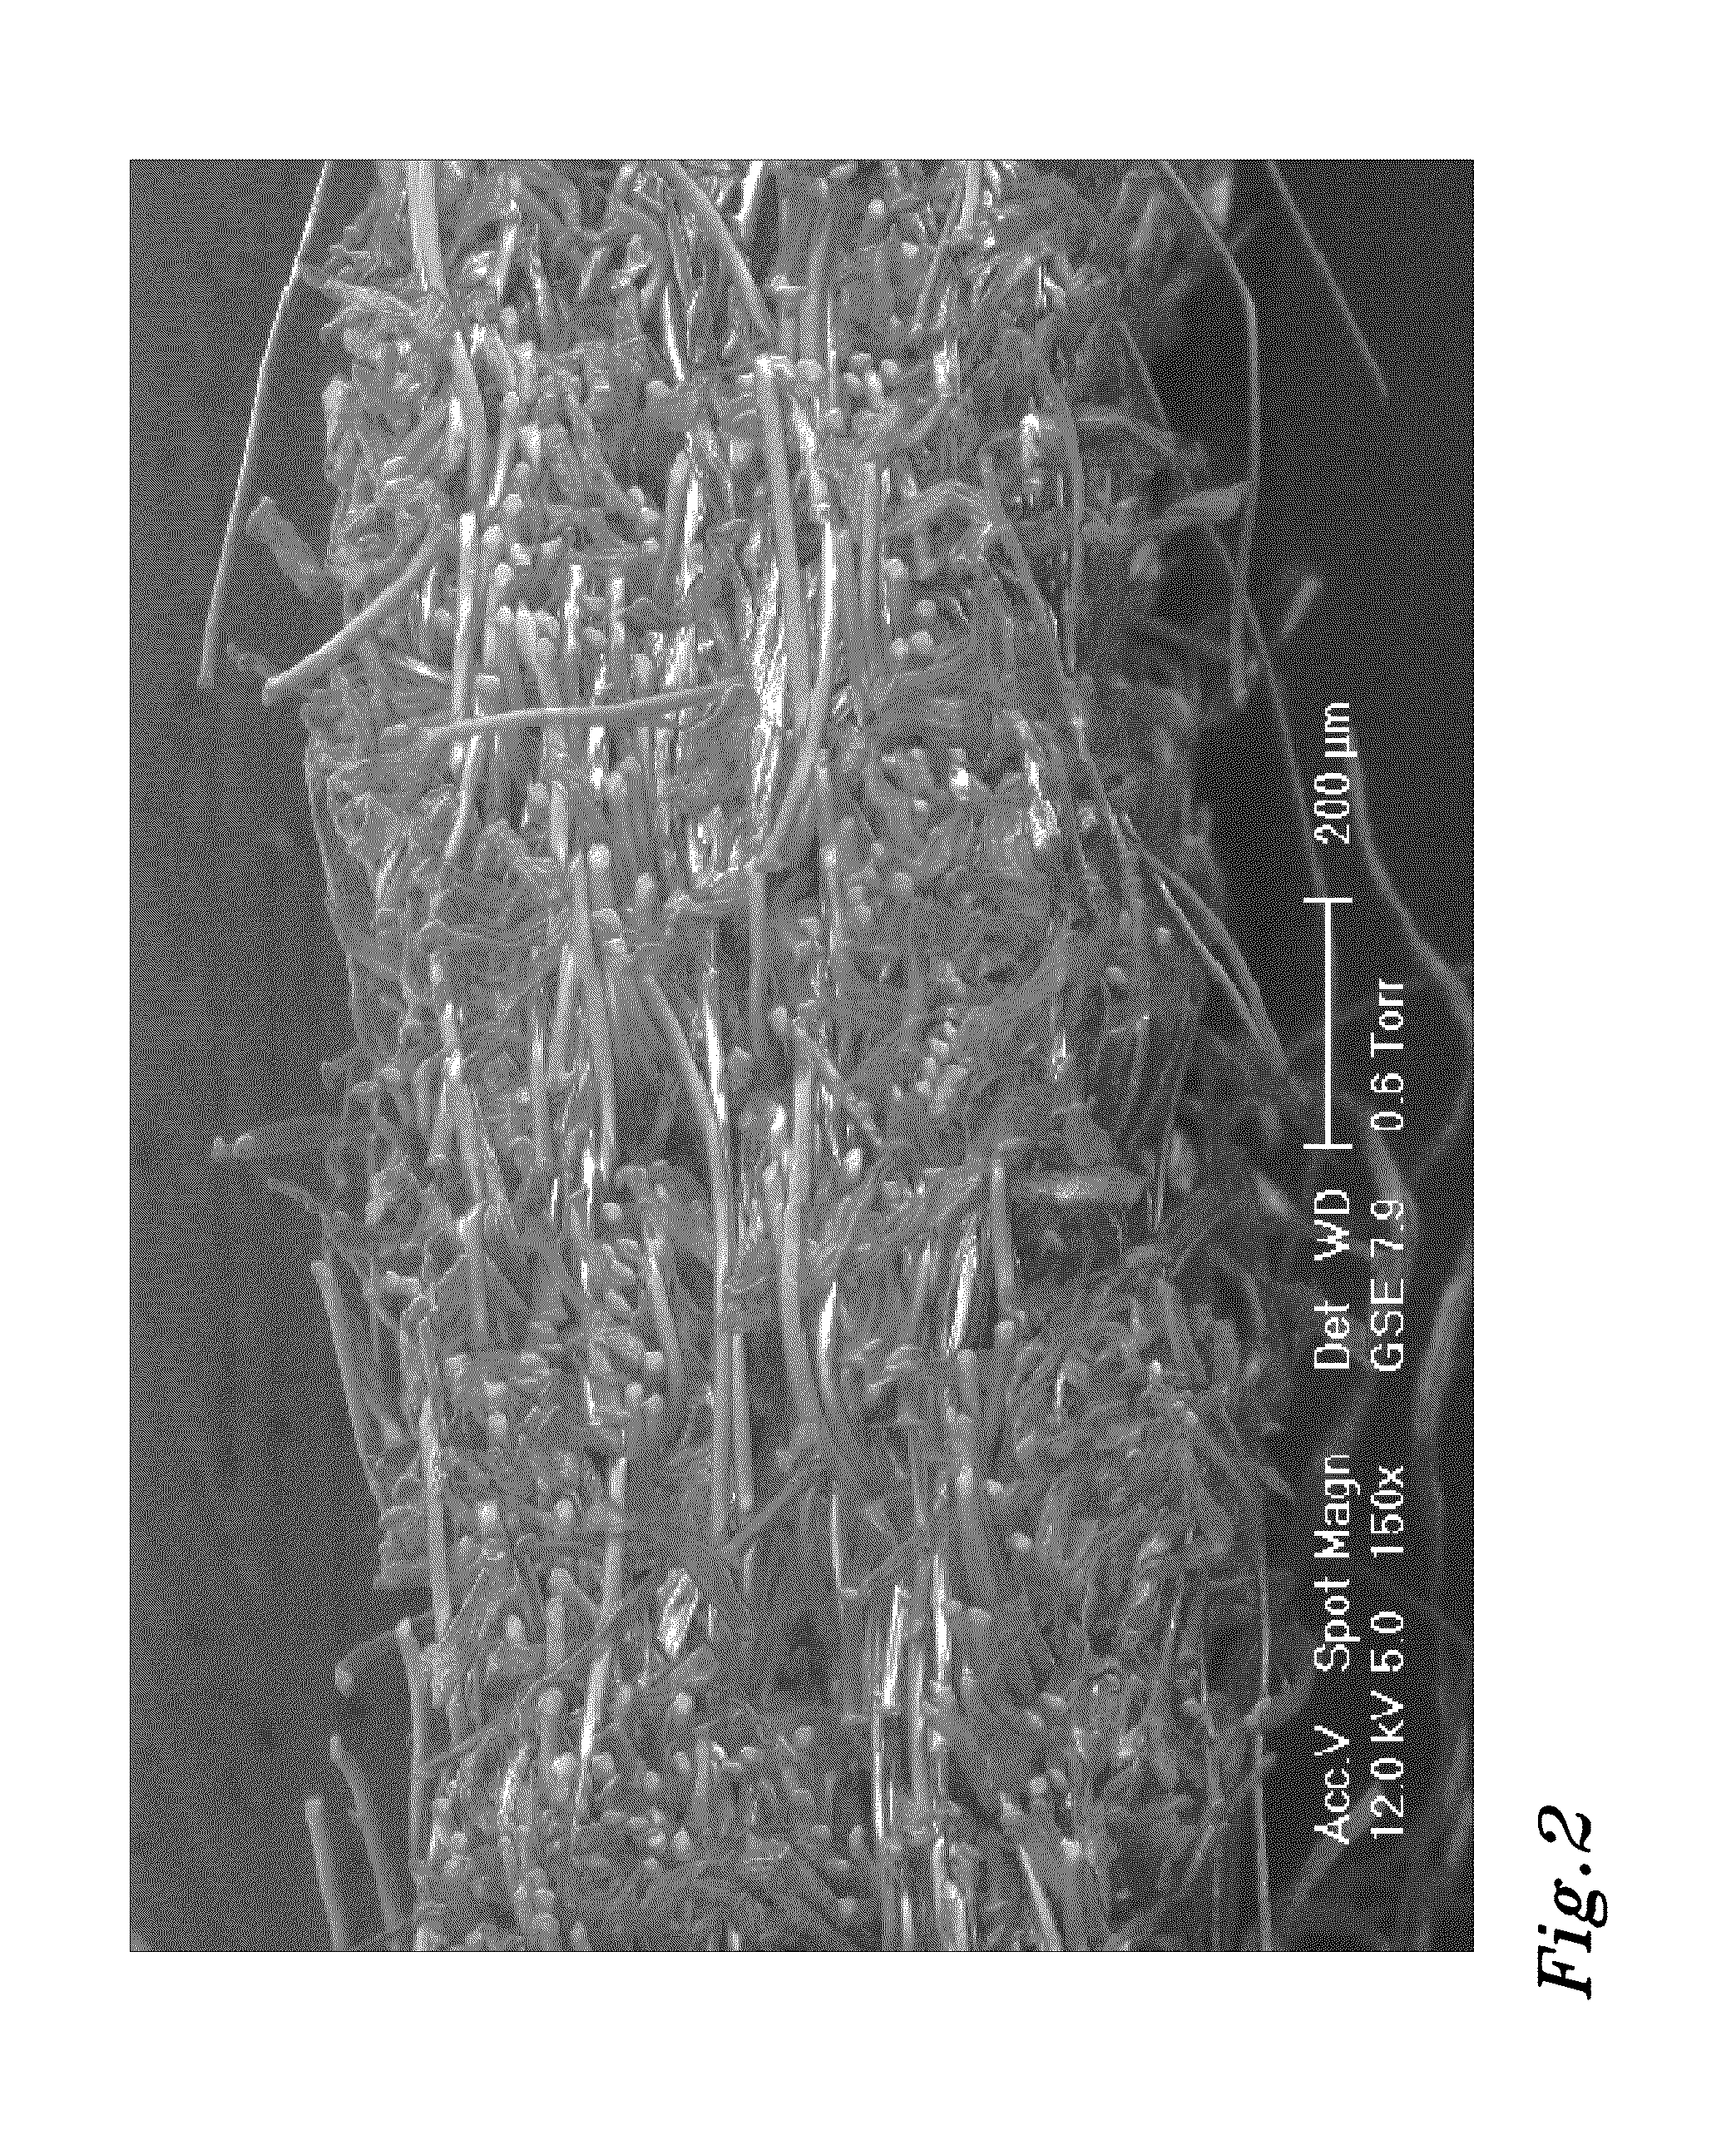 Method of producing a hydroentangled nonwoven material